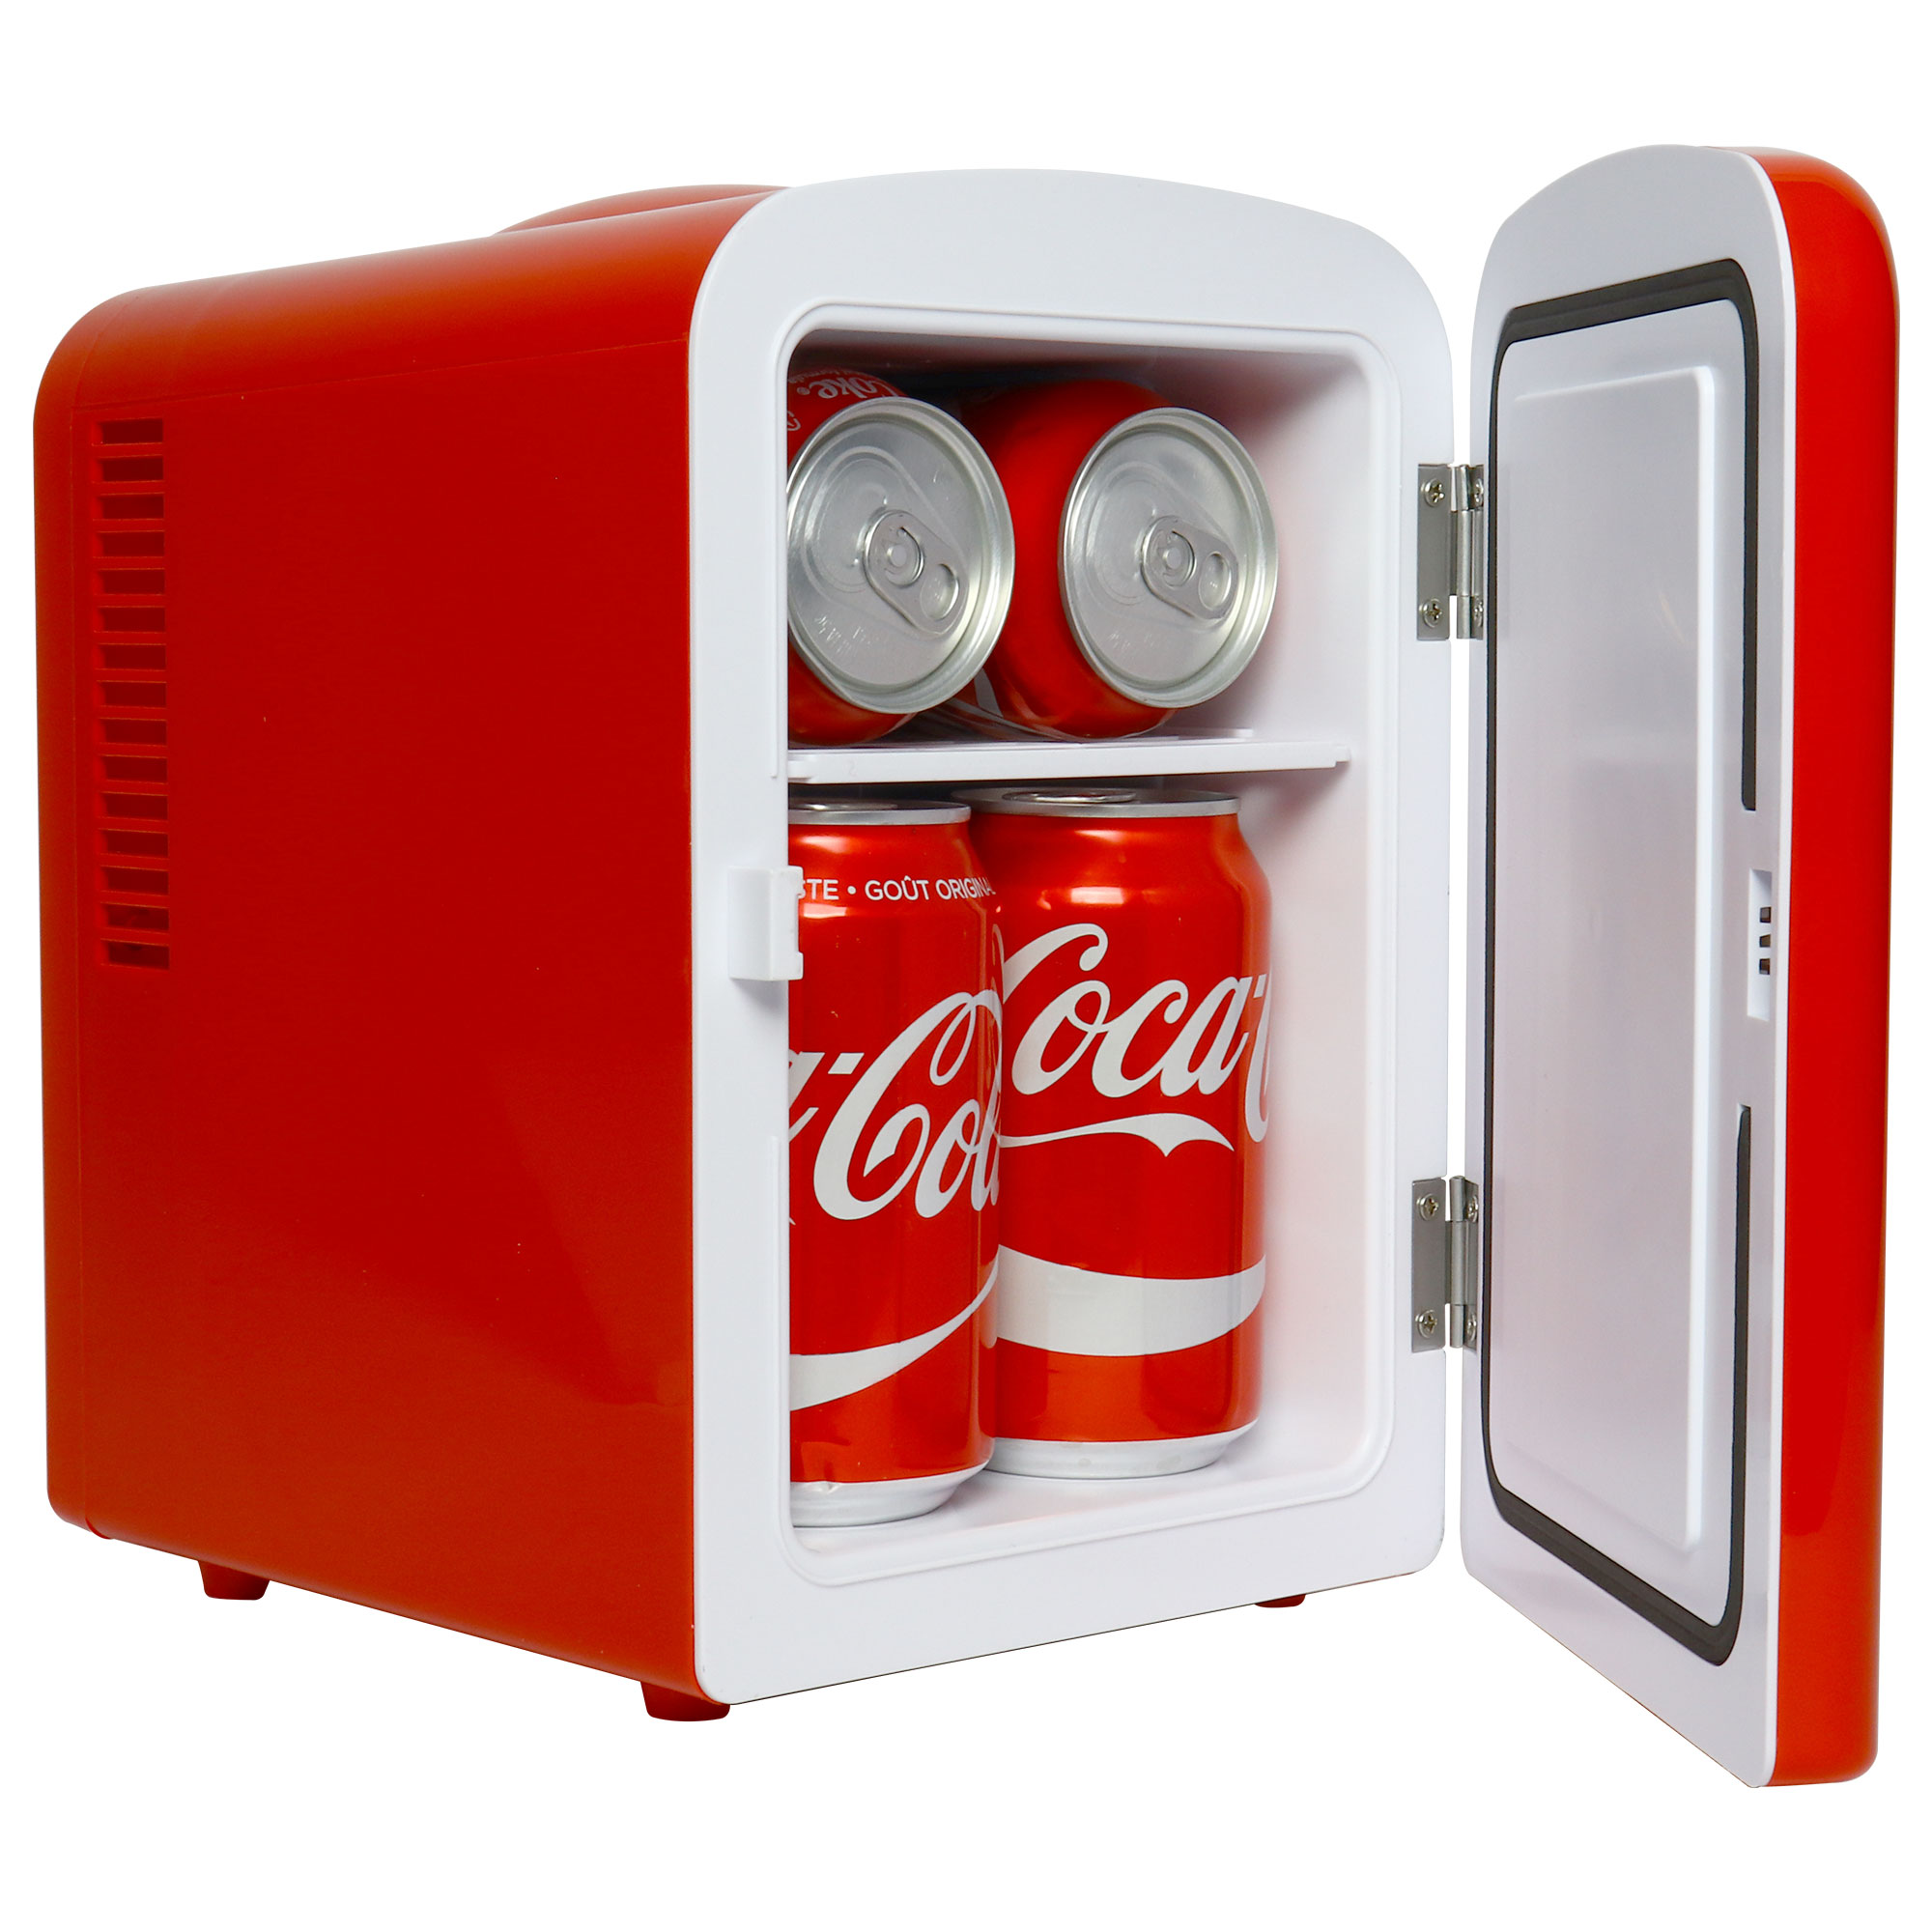 Coca-Cola Classic 4L Mini Fridge w/ 12V DC and 110V AC Cords, 6 Can Portable Cooler, Personal Travel Refrigerator for Snacks Lunch Drinks Cosmetics, Desk Home Office Dorm, Red - image 1 of 8